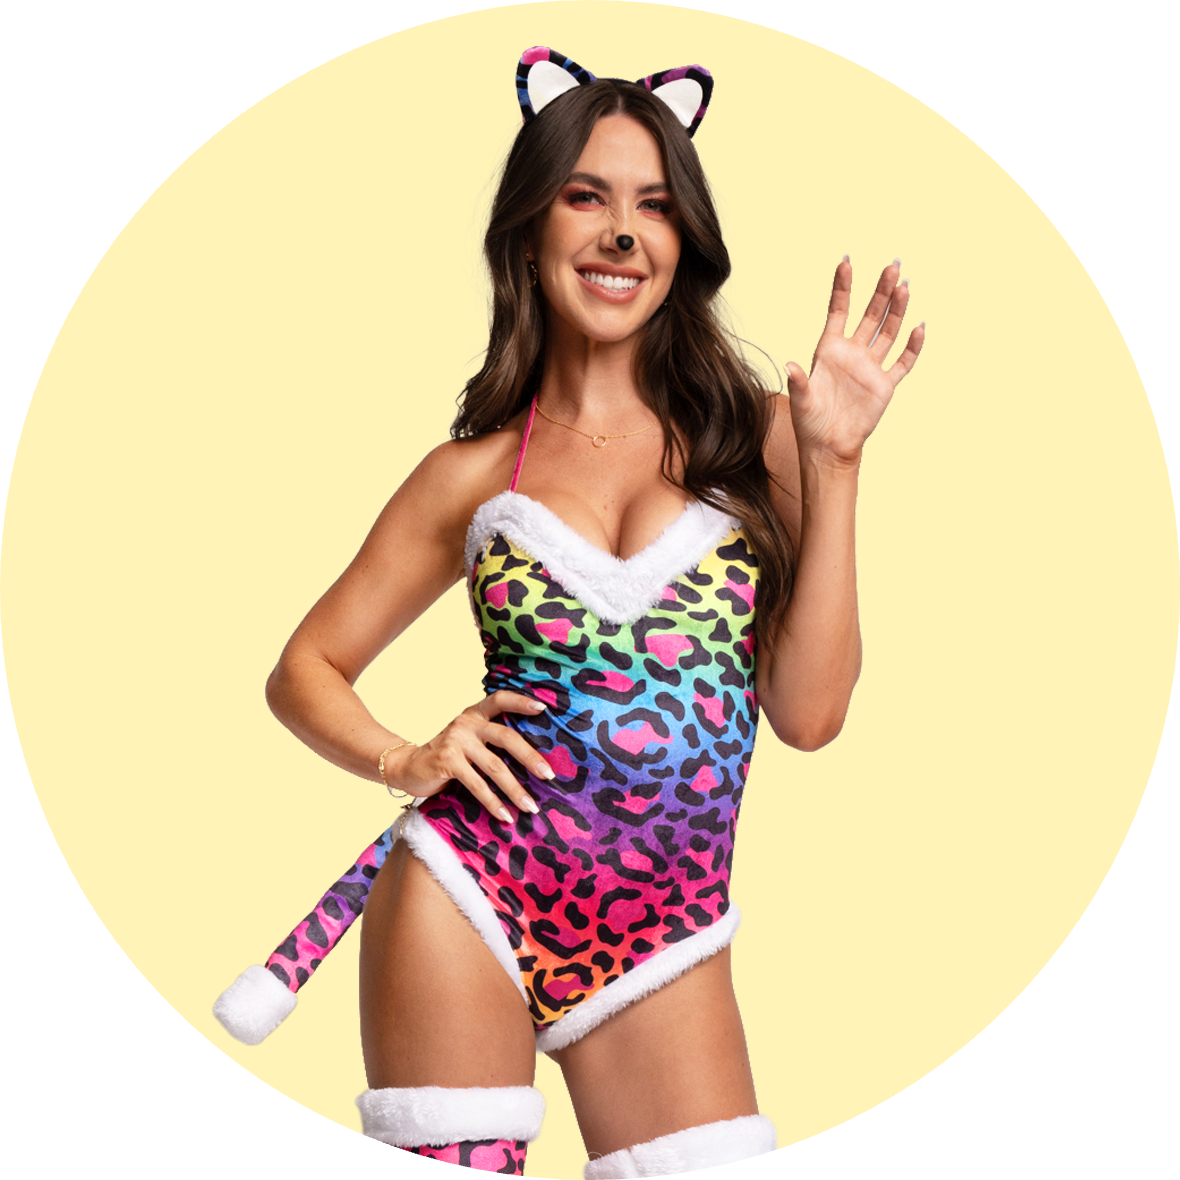 shop sexy costumes - image of model wearing women's sexy leopard costume